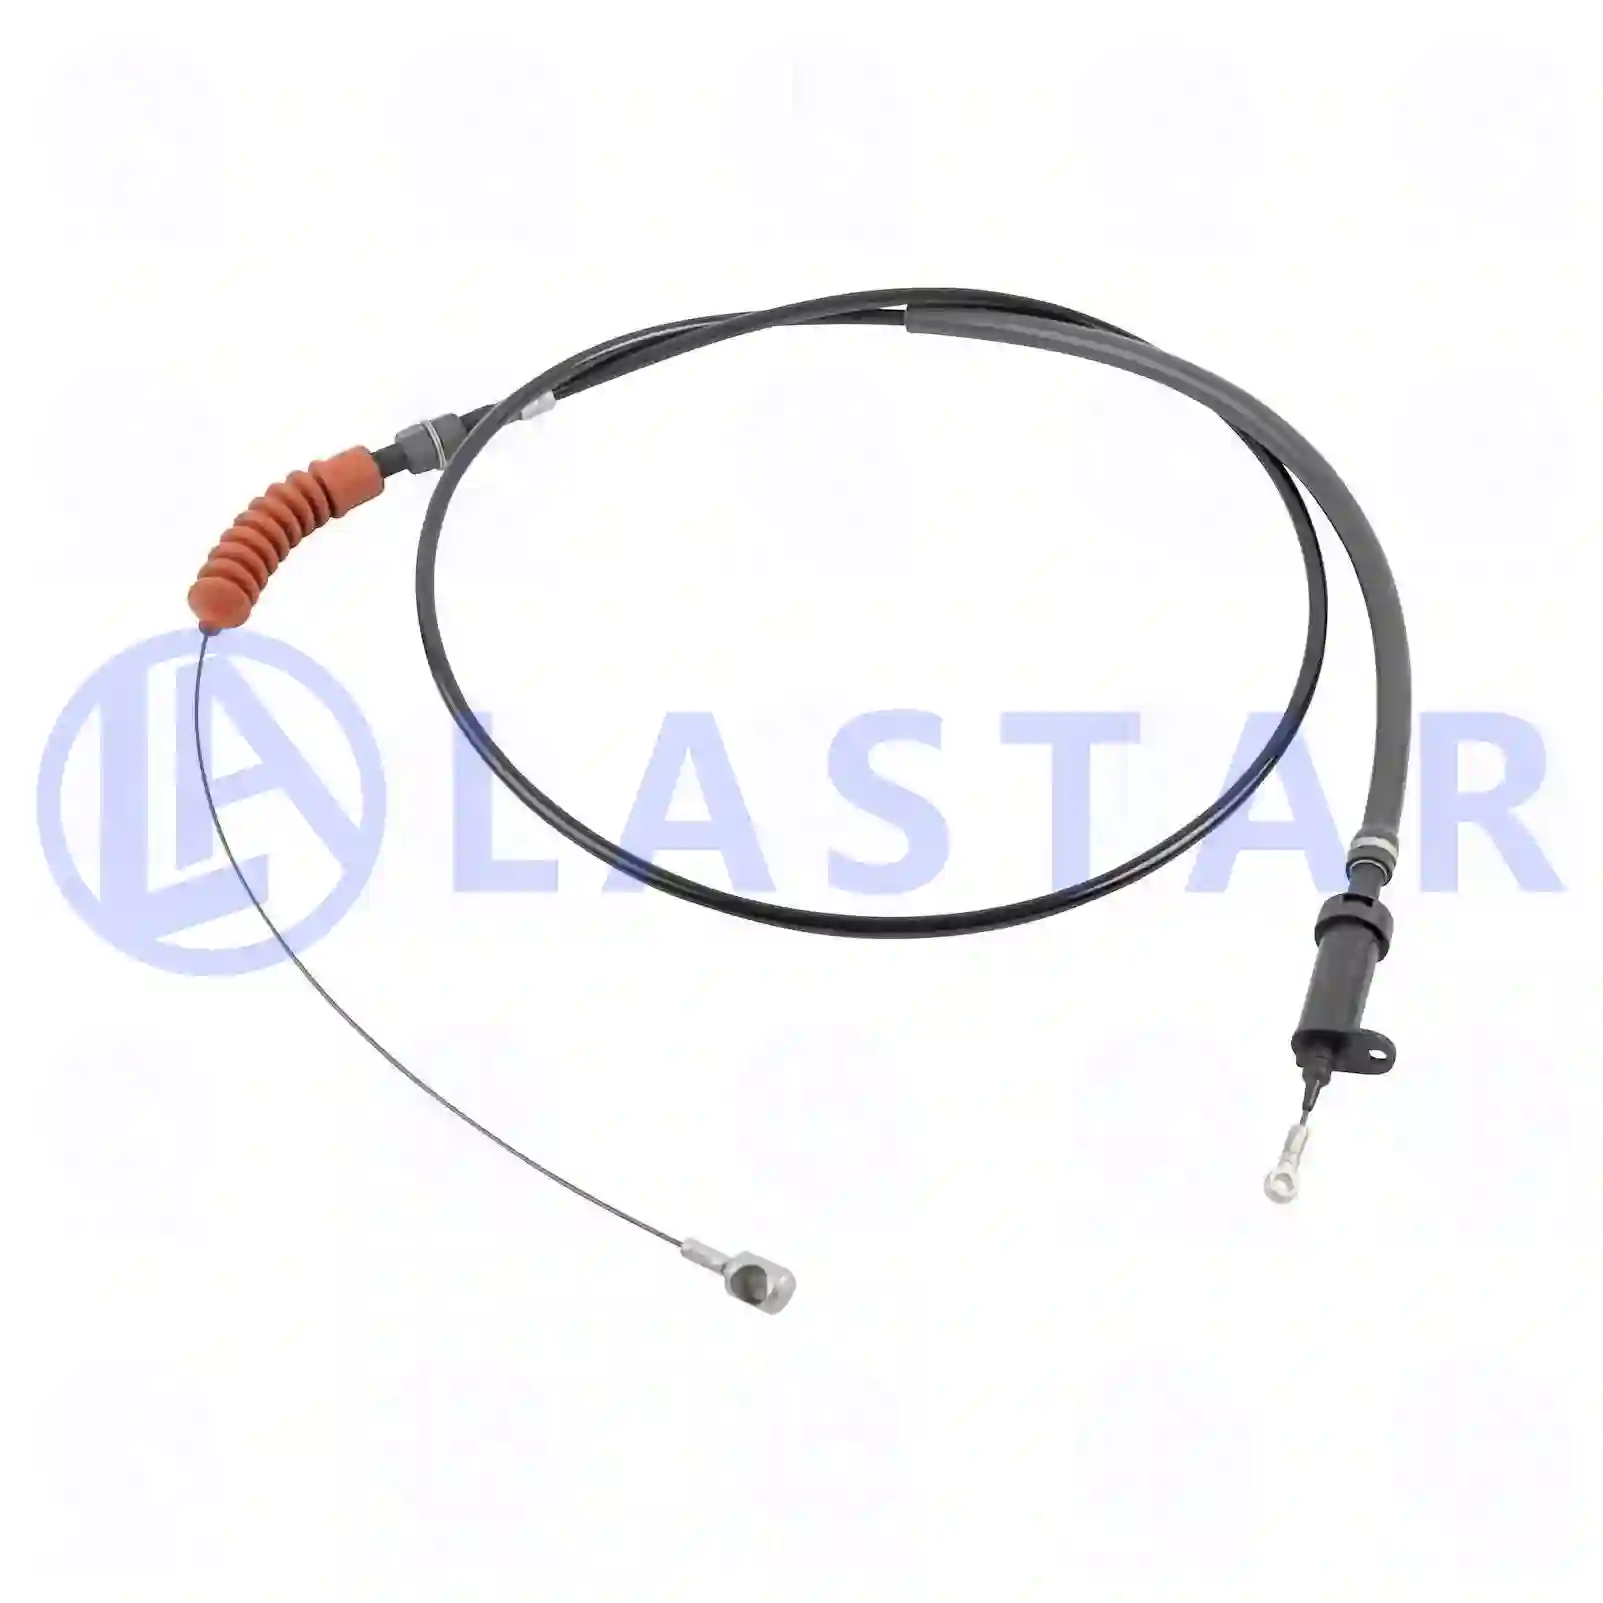 Throttle cable, 77701129, 41021267, 984183 ||  77701129 Lastar Spare Part | Truck Spare Parts, Auotomotive Spare Parts Throttle cable, 77701129, 41021267, 984183 ||  77701129 Lastar Spare Part | Truck Spare Parts, Auotomotive Spare Parts